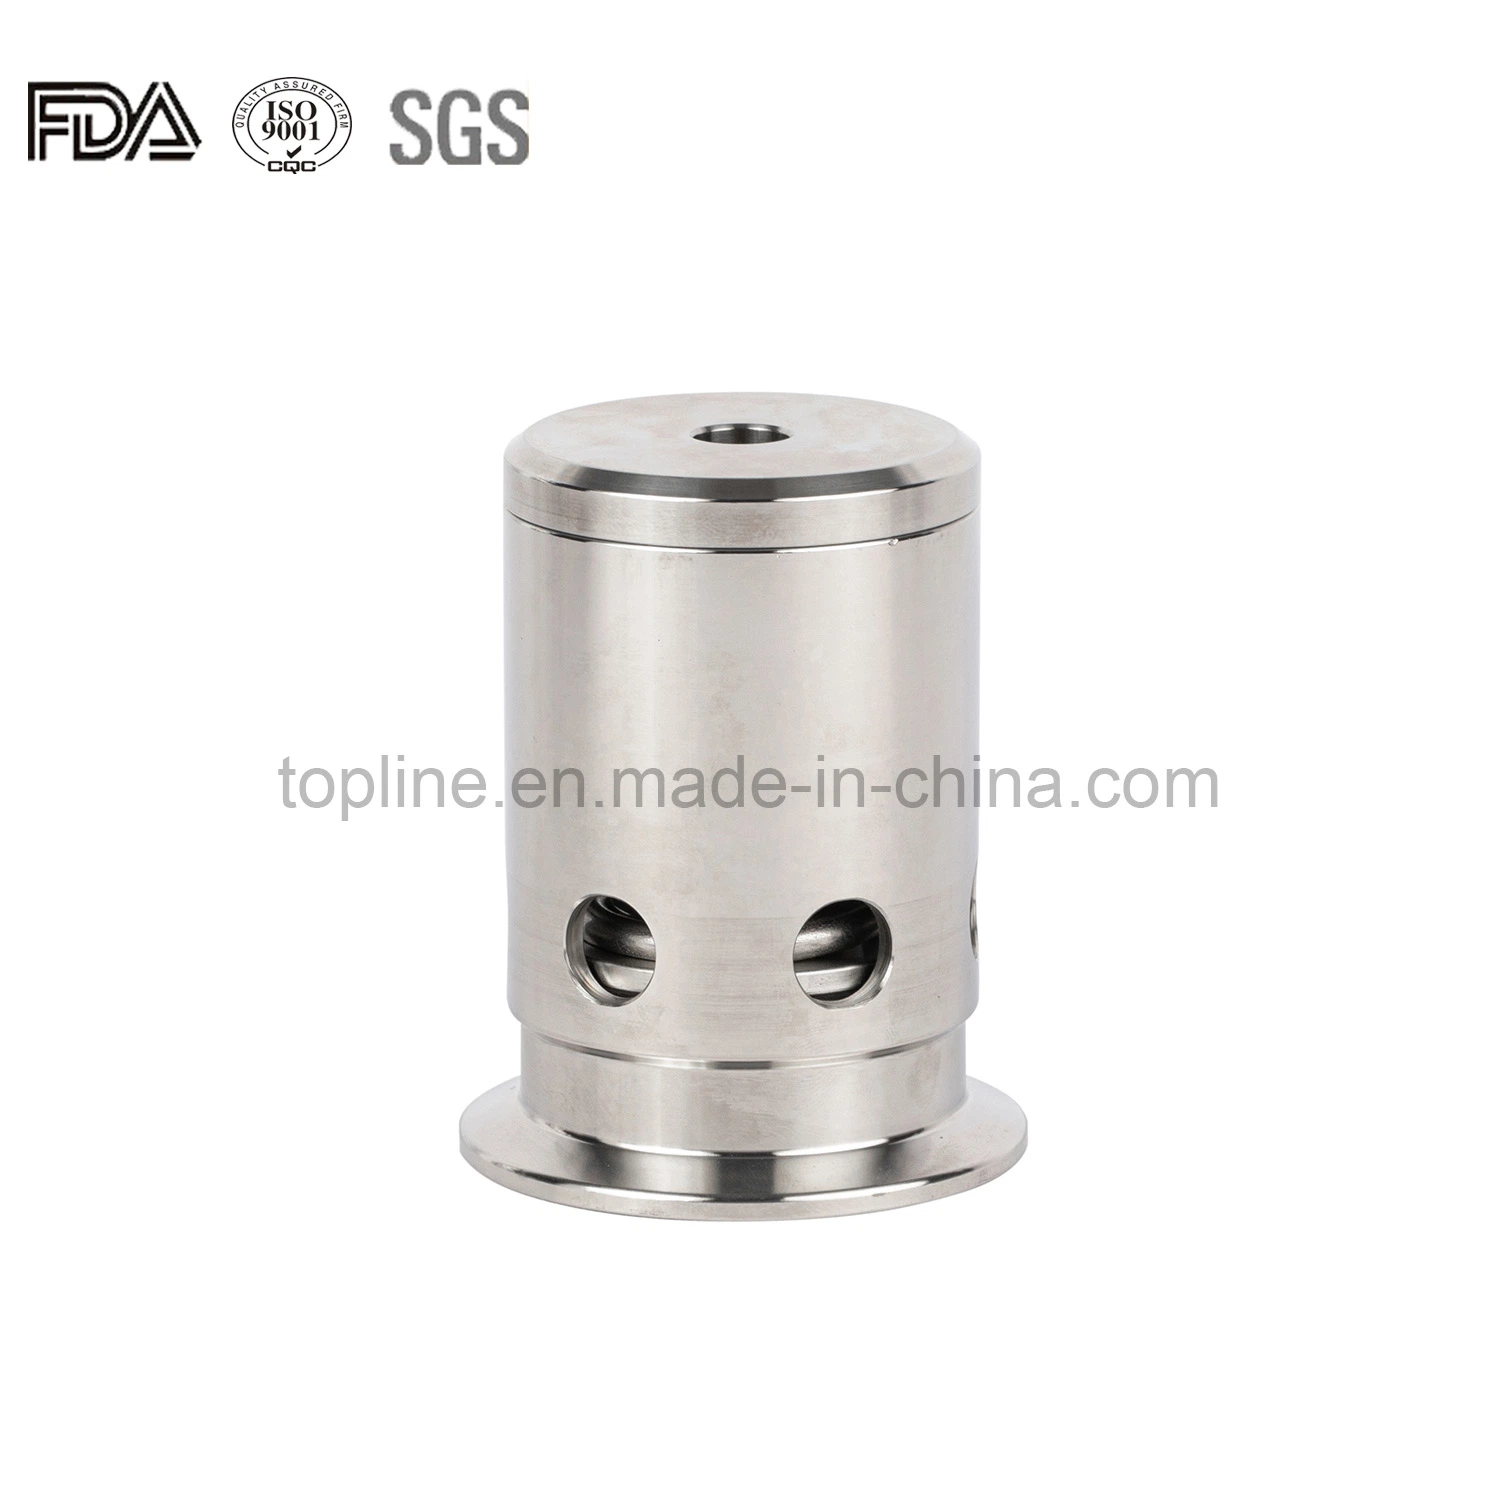 SS304 3316L Sanitary Hygienic Stainless Steel Vacuum Relief Valve for Pipeline Container